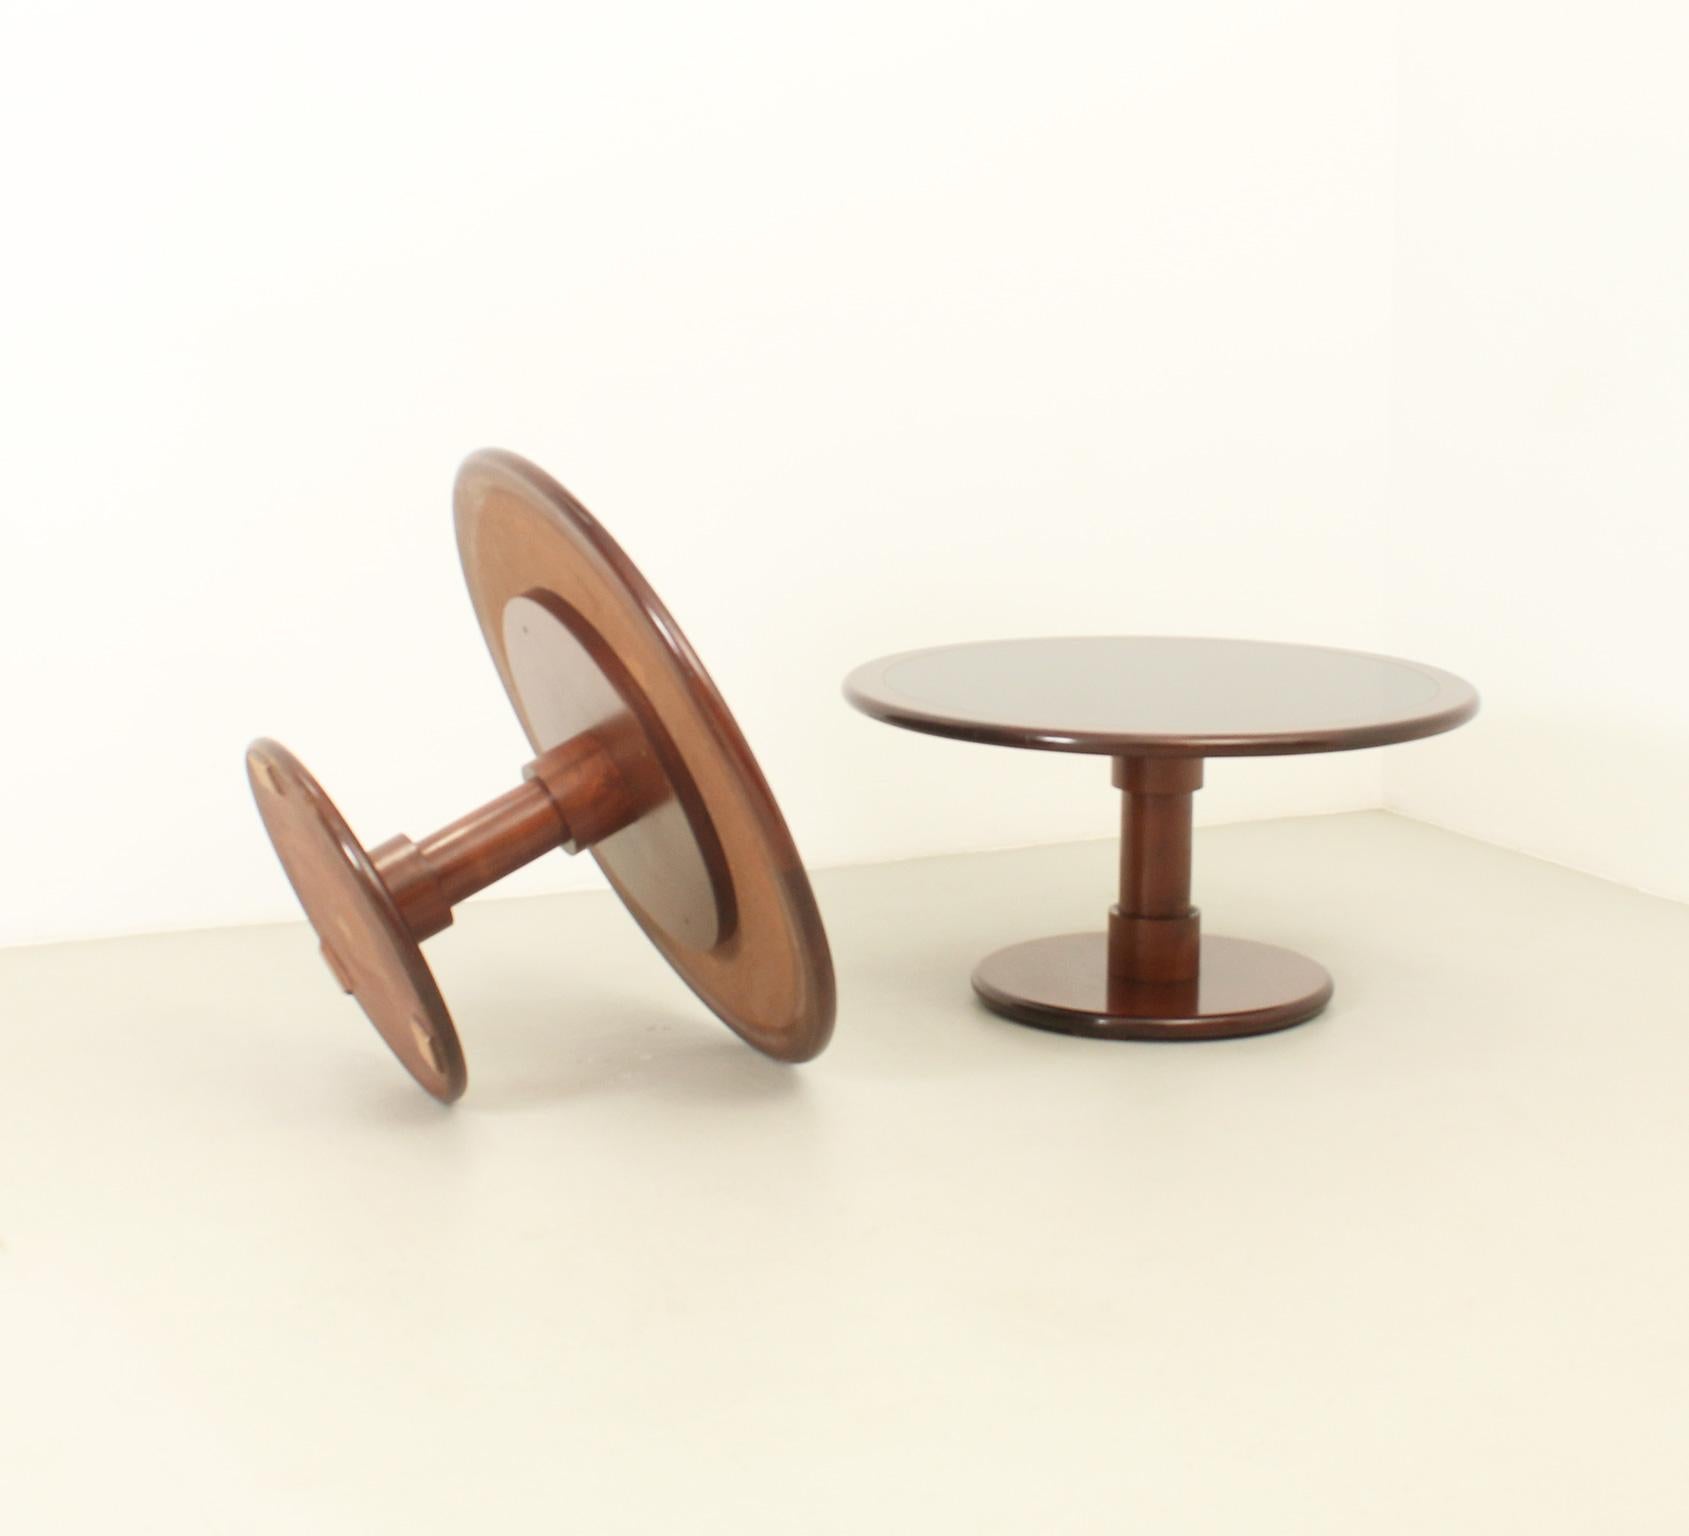 Pair of Coffee or Side Tables by Spanish Architects Correa & Milá, 1960's For Sale 8